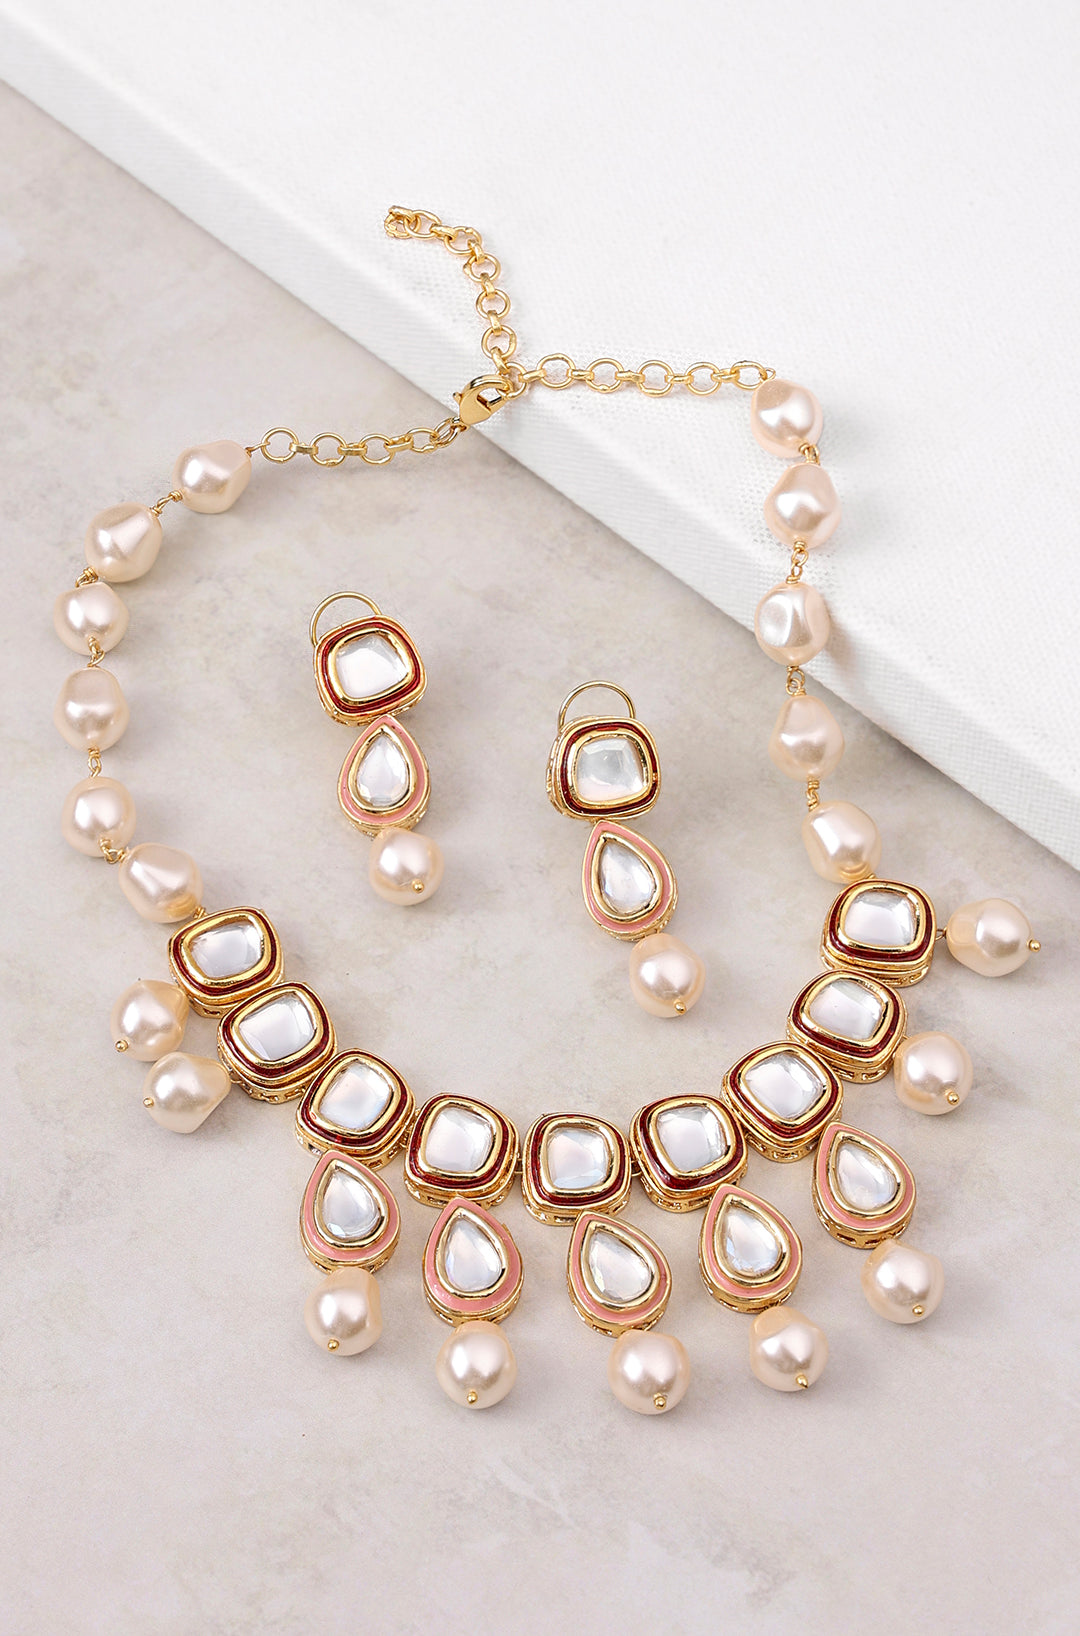 Load image into Gallery viewer, Kundan Polki Necklace Set With Pearls - Joules by Radhika
